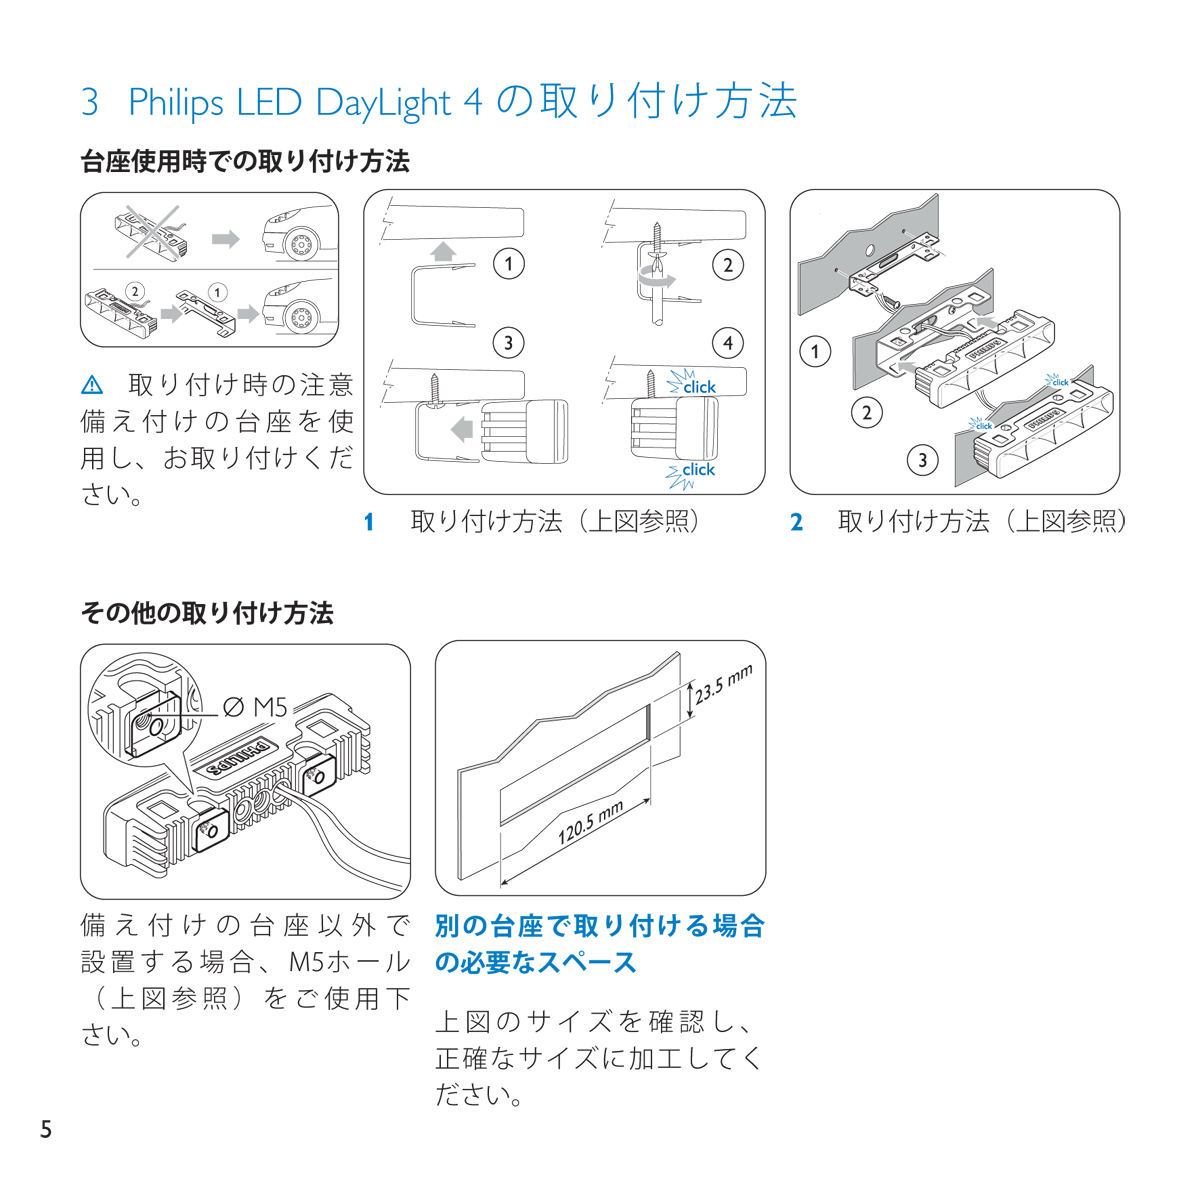 Philips LED DayLight 4 user guide - inside page